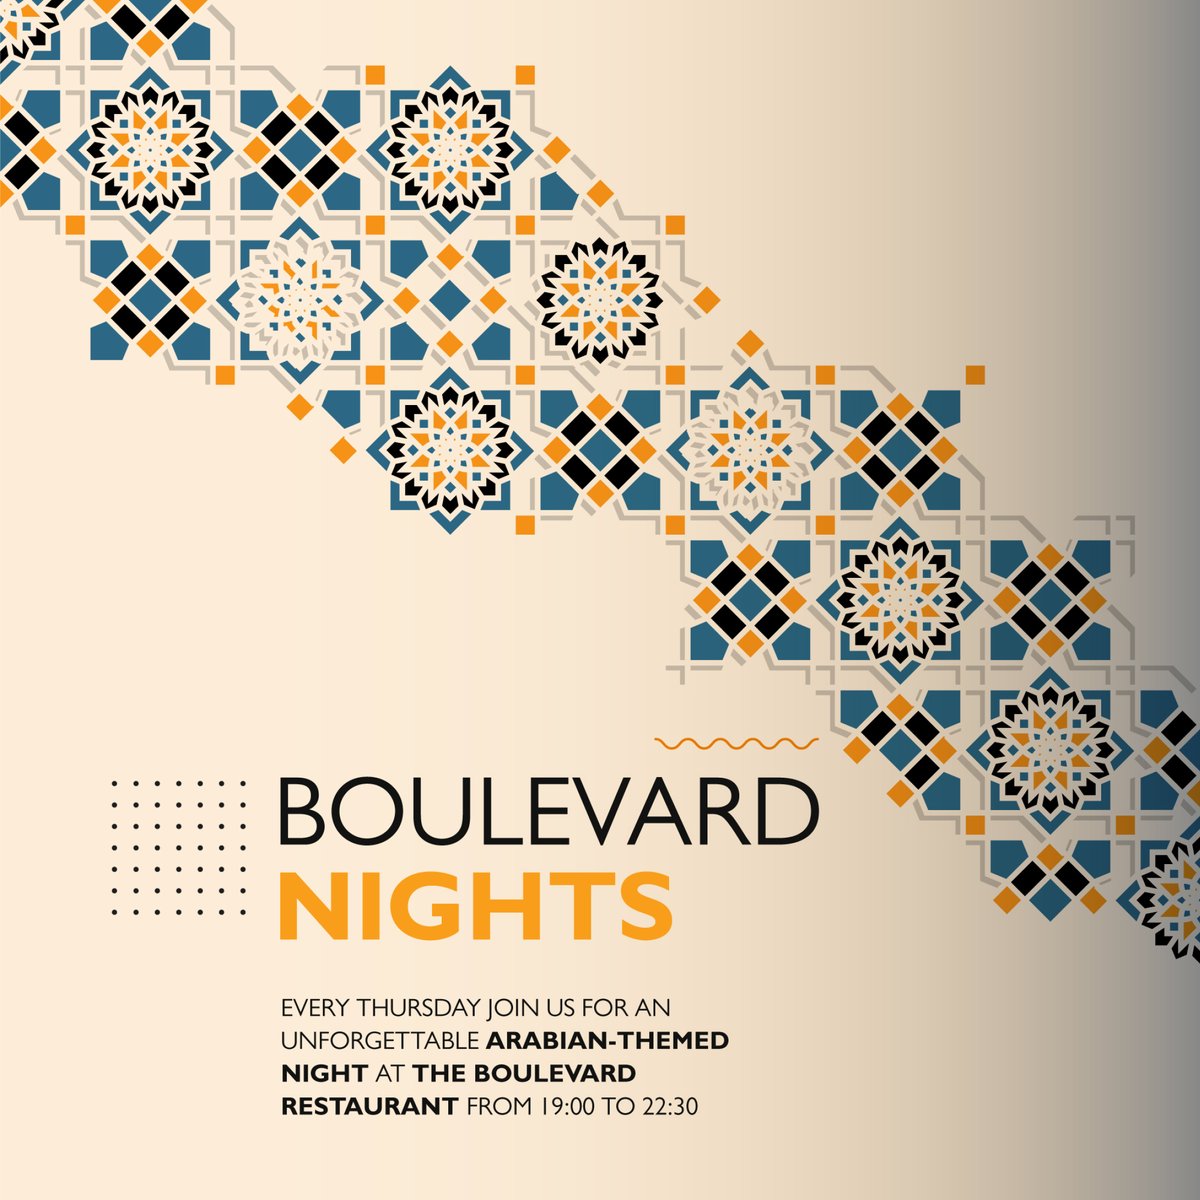 Savourauthentic Arabic Flavours in a lively dinner buffet at The Boulevard every Thursday from 19:00 to 22:30 at JOD 15 inclusive per person

For bookings, please call 06 5686666

#corpamman #hmhhotelgroup #amman #food #foodi
#instafood #arabicfood #jordanfood